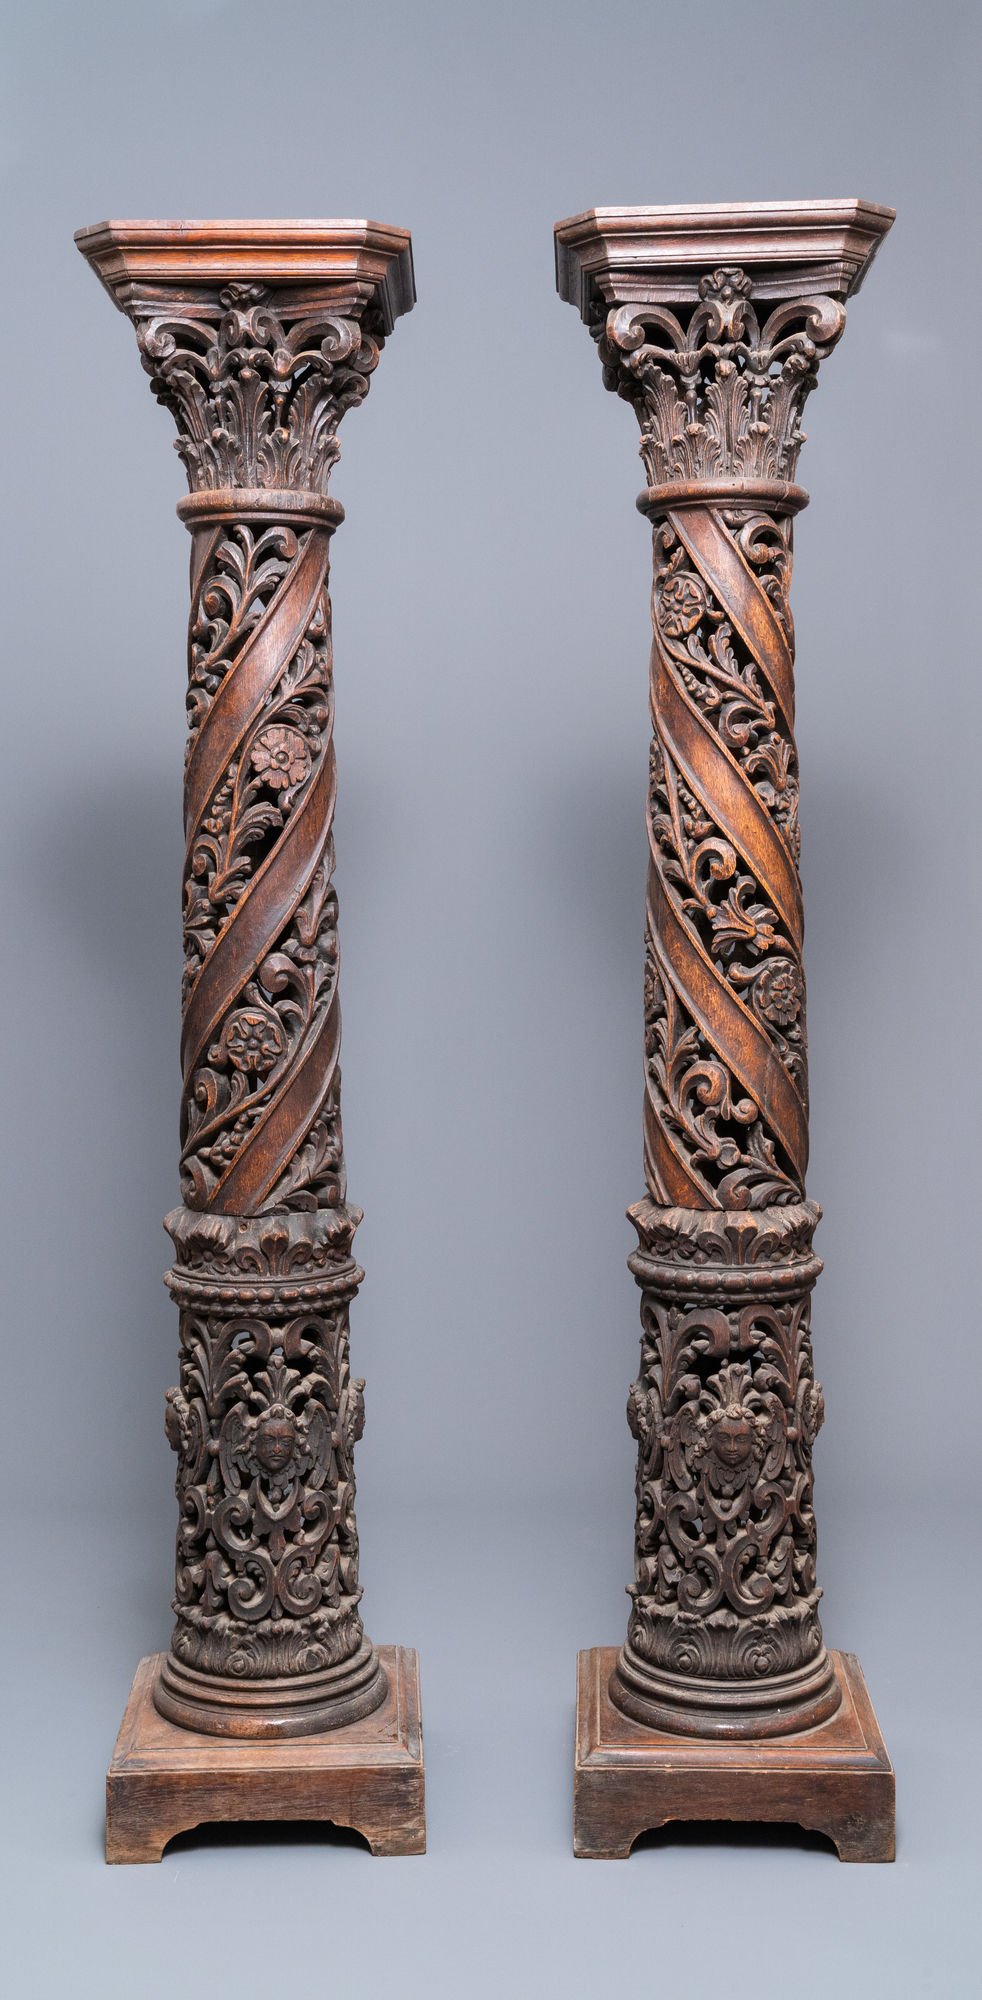 A pair of reticulated carved oak Corinthian columns with cherub heads and vines, 17th C. - Image 2 of 7